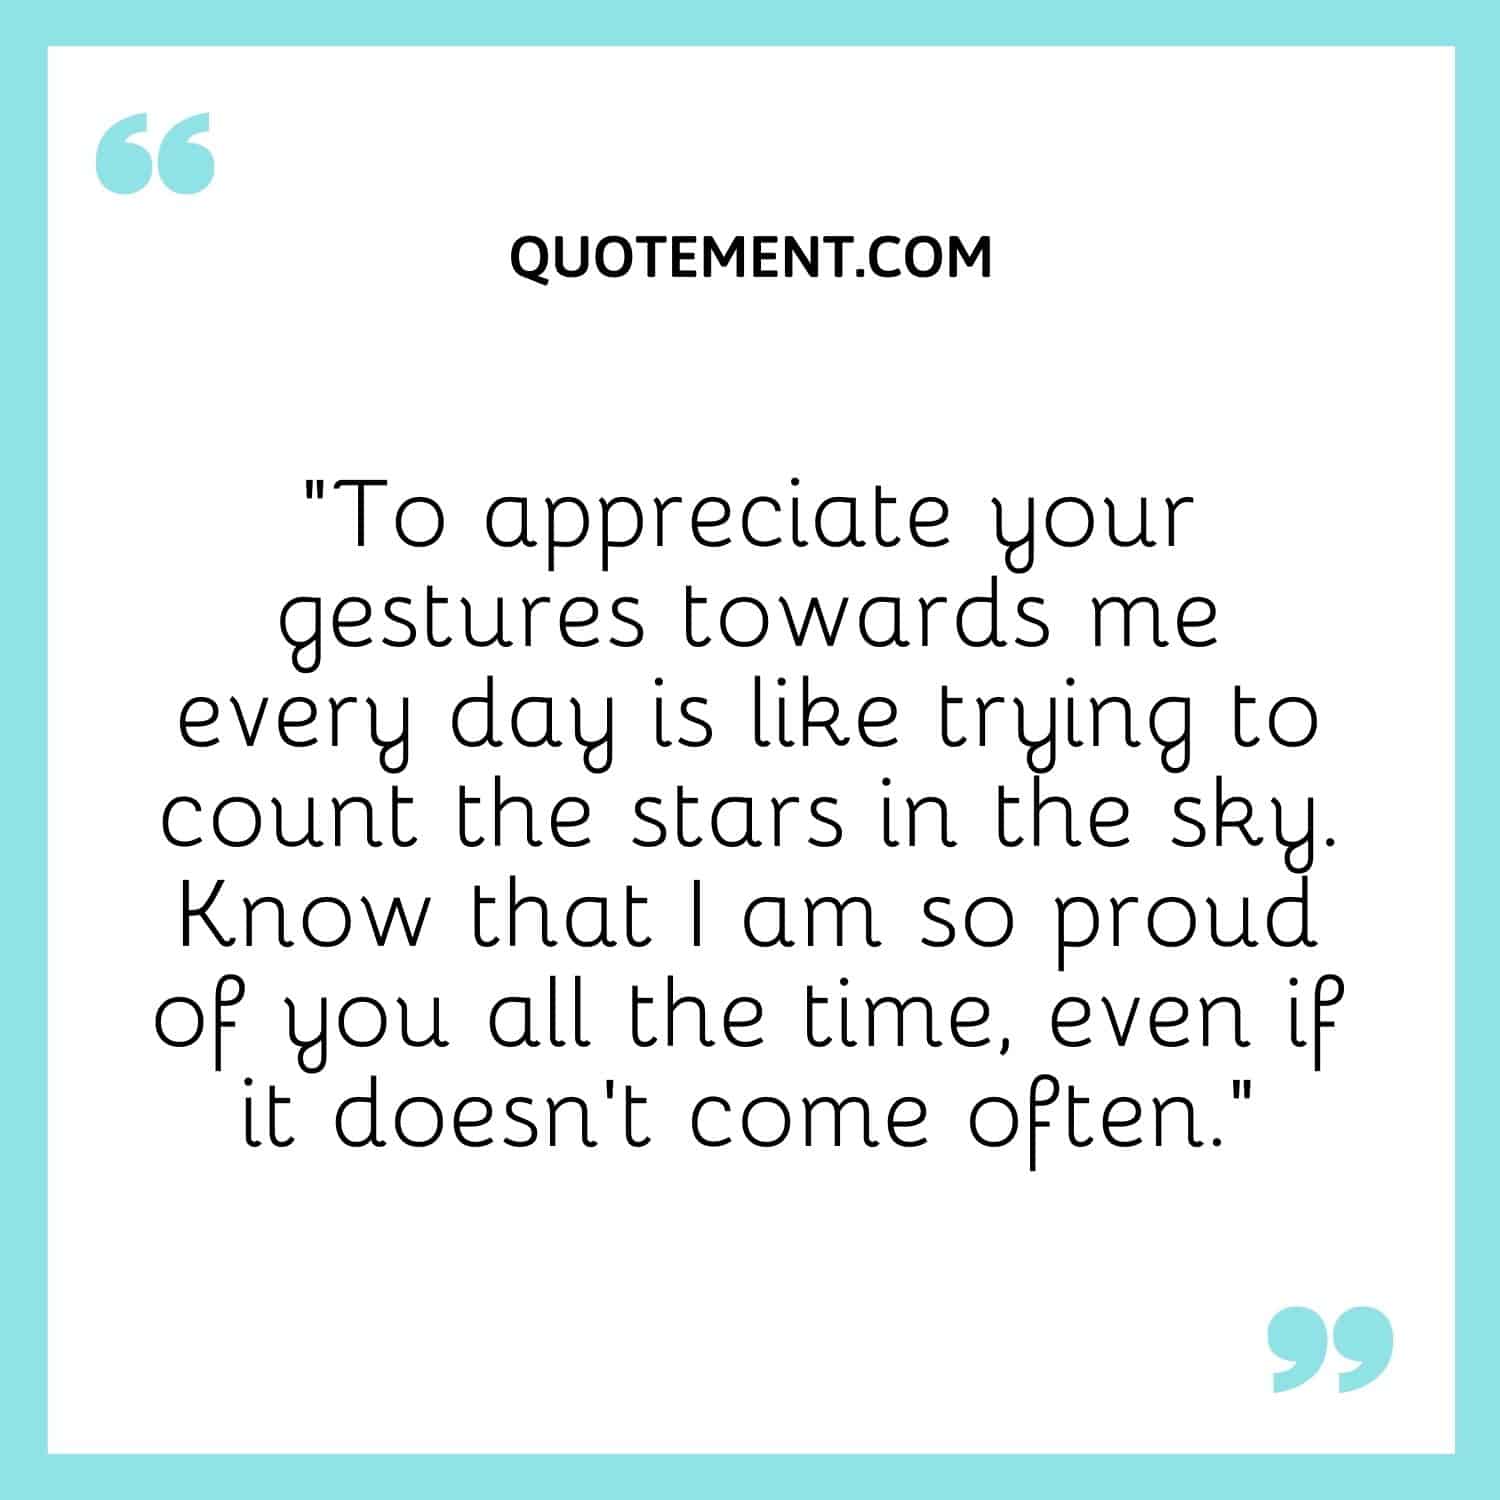 “To appreciate your gestures towards me every day is like trying to count the stars in the sky. Know that I am so proud of you all the time, even if it doesn’t come often.”